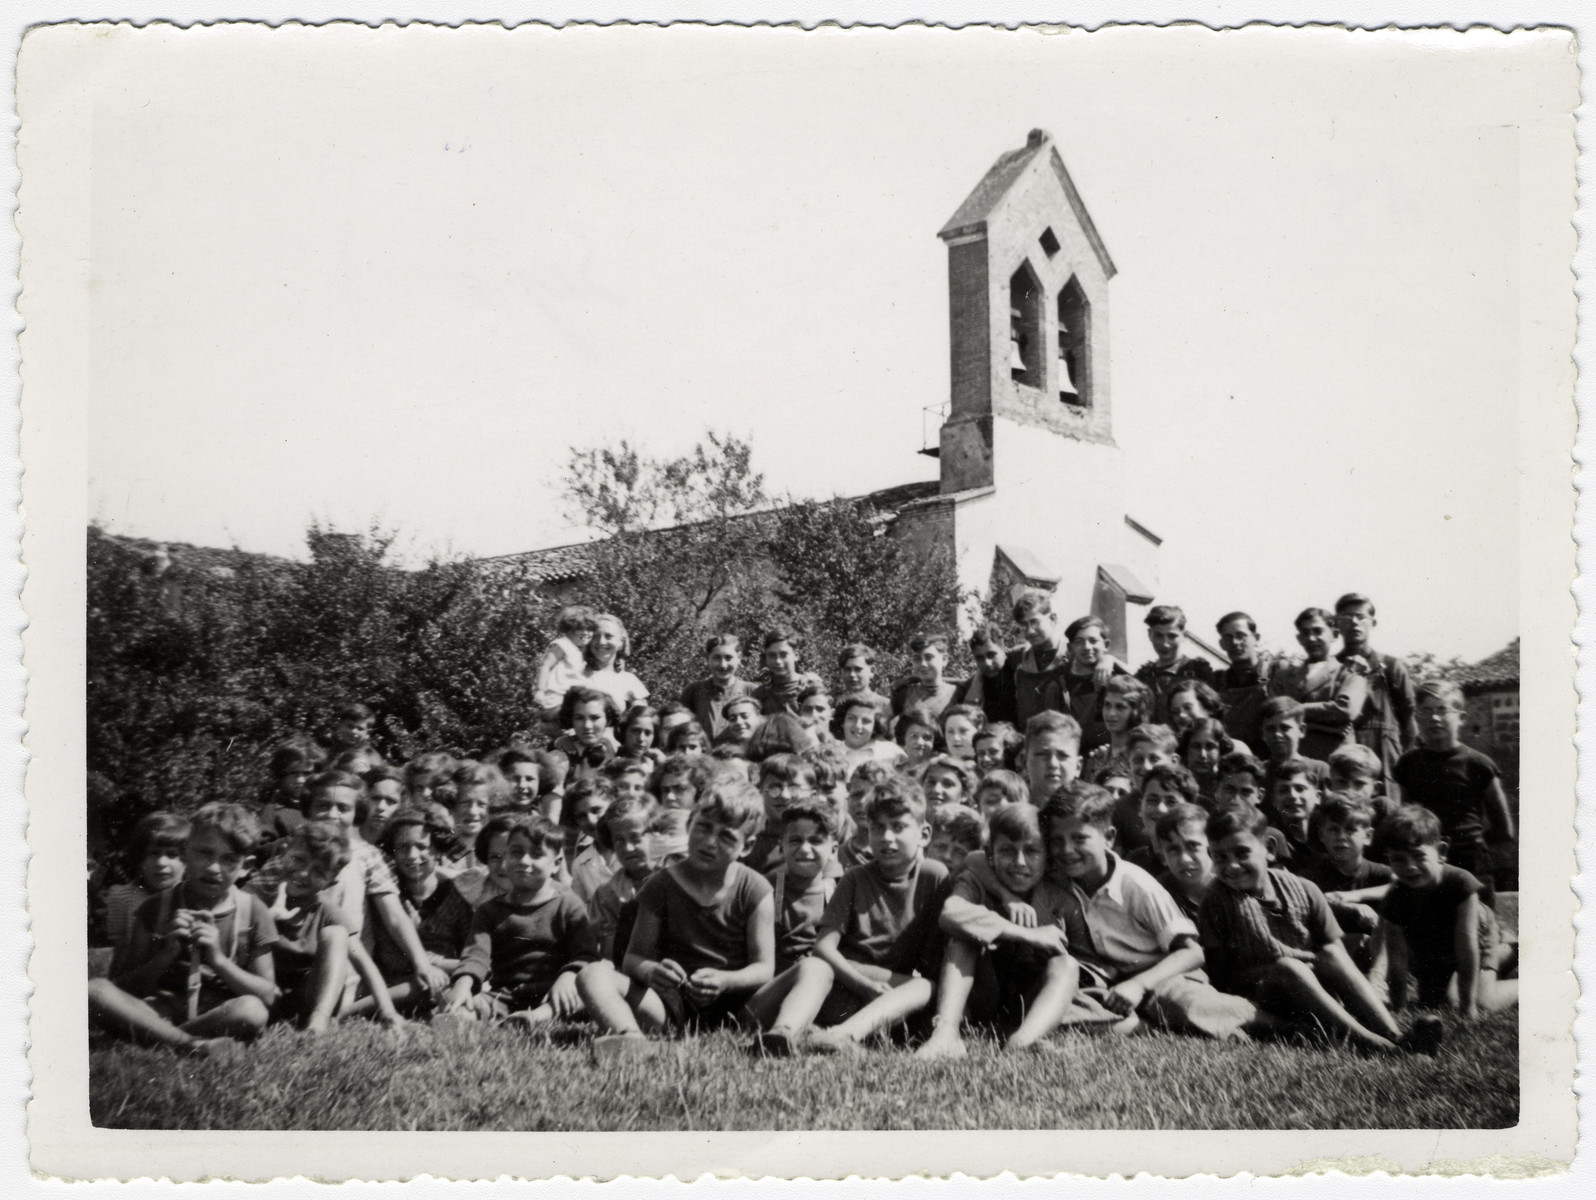 Group portrait of children in the Seyre children's home in the summer of 1940, the year France was conquered.